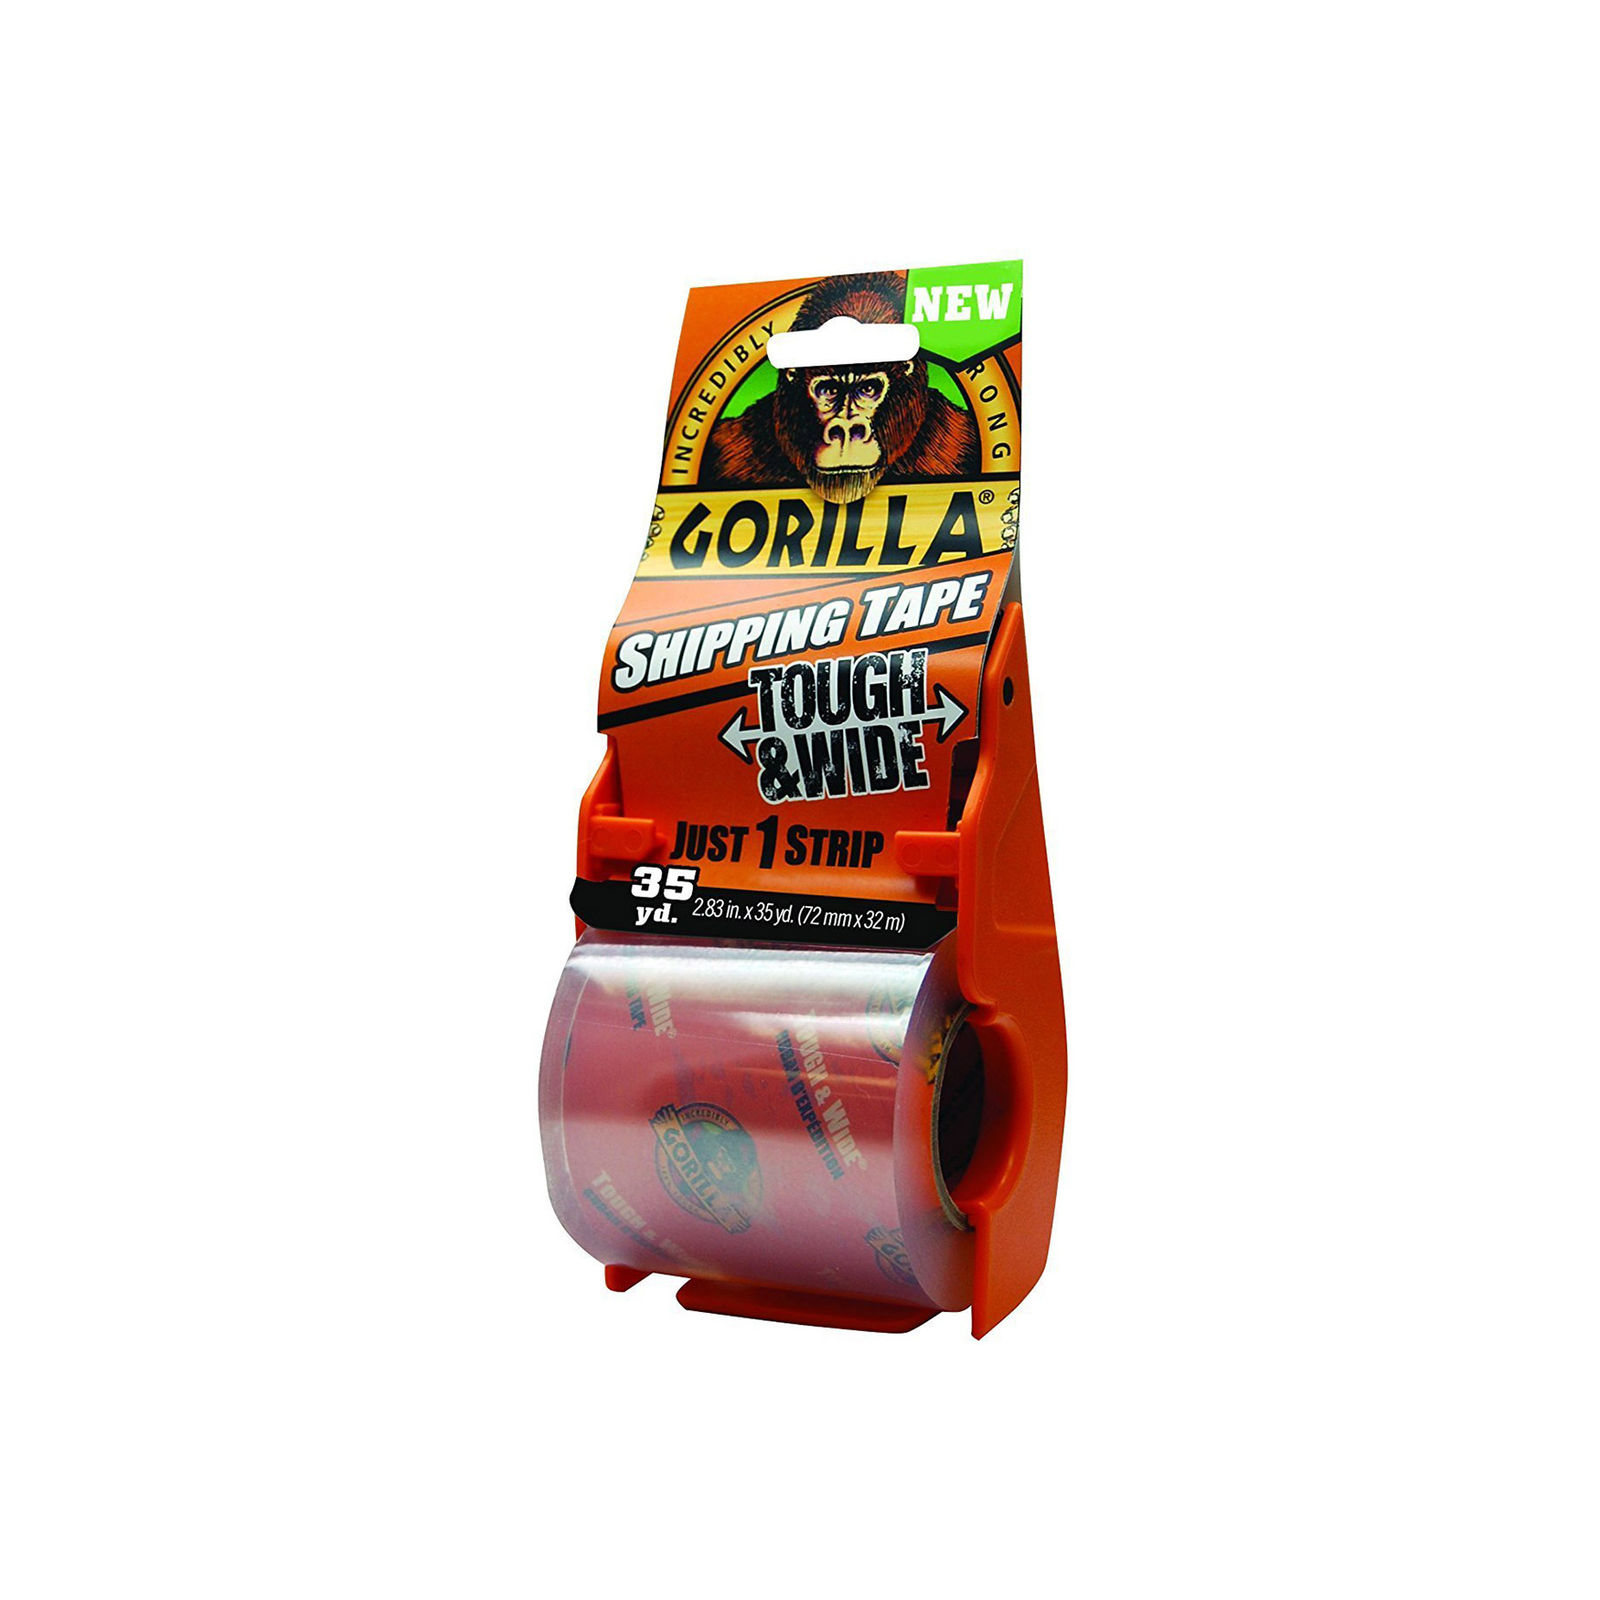 Gorilla Packing Tape Tough & Wide with Dispenser, 2.83" x 35 yd